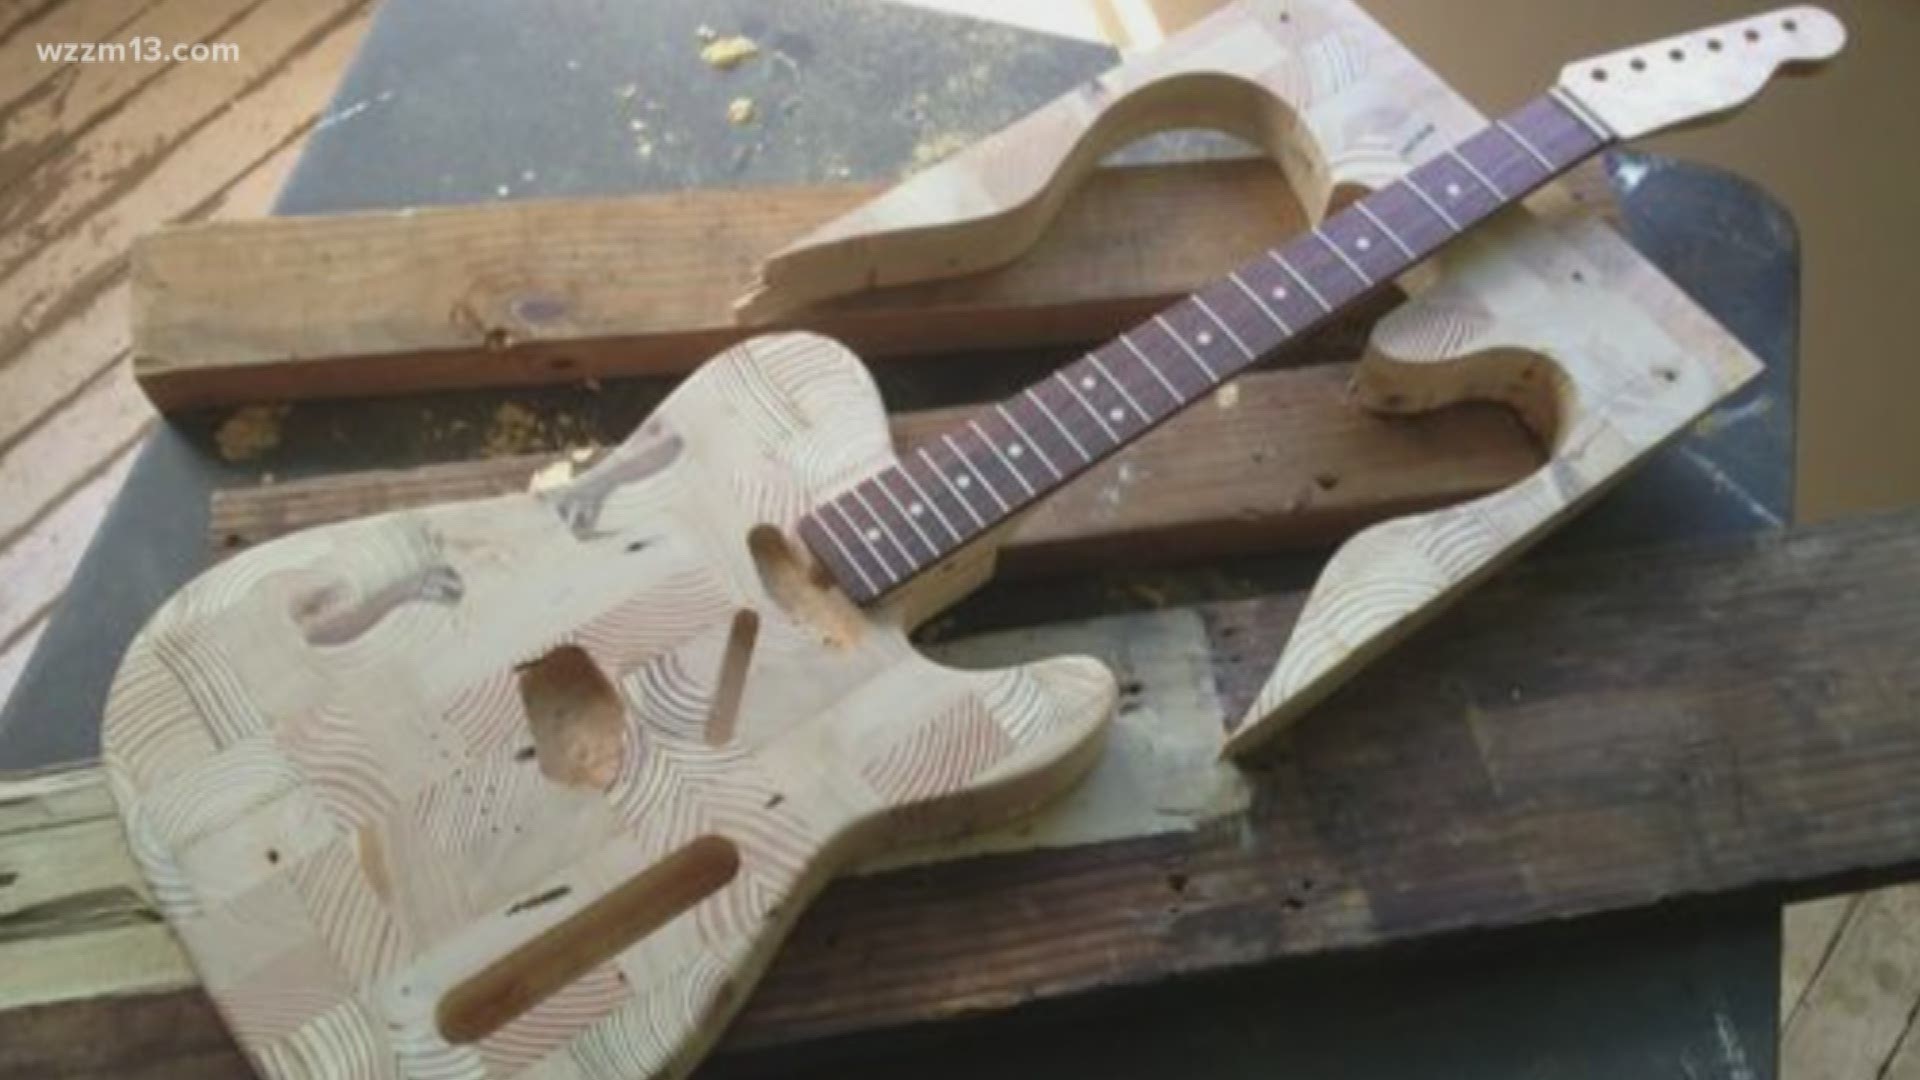 Guitars being made out of Chevrolet plant wood